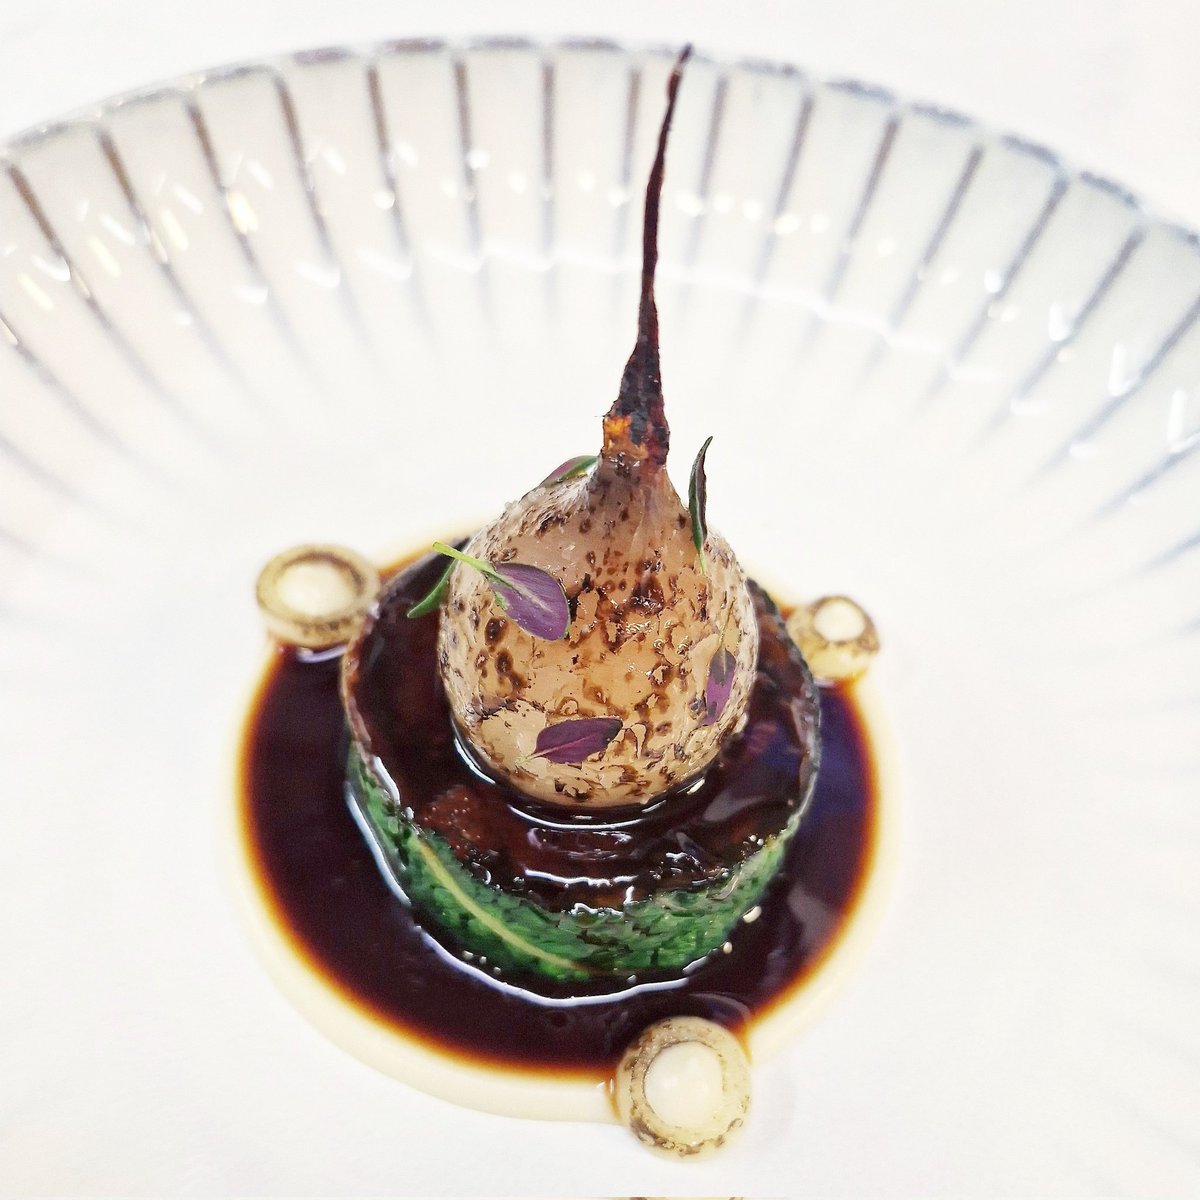 Bordelaise / hereford featherblade / roscoff / celeriac Slow braised beef featherblade, glazed in its own sauce, roasted roscoff onion, hollowed & filled with celeriac choucroute, mustard, its own onion centres & finished in brown butter. • #classical #cookery #braised #chef